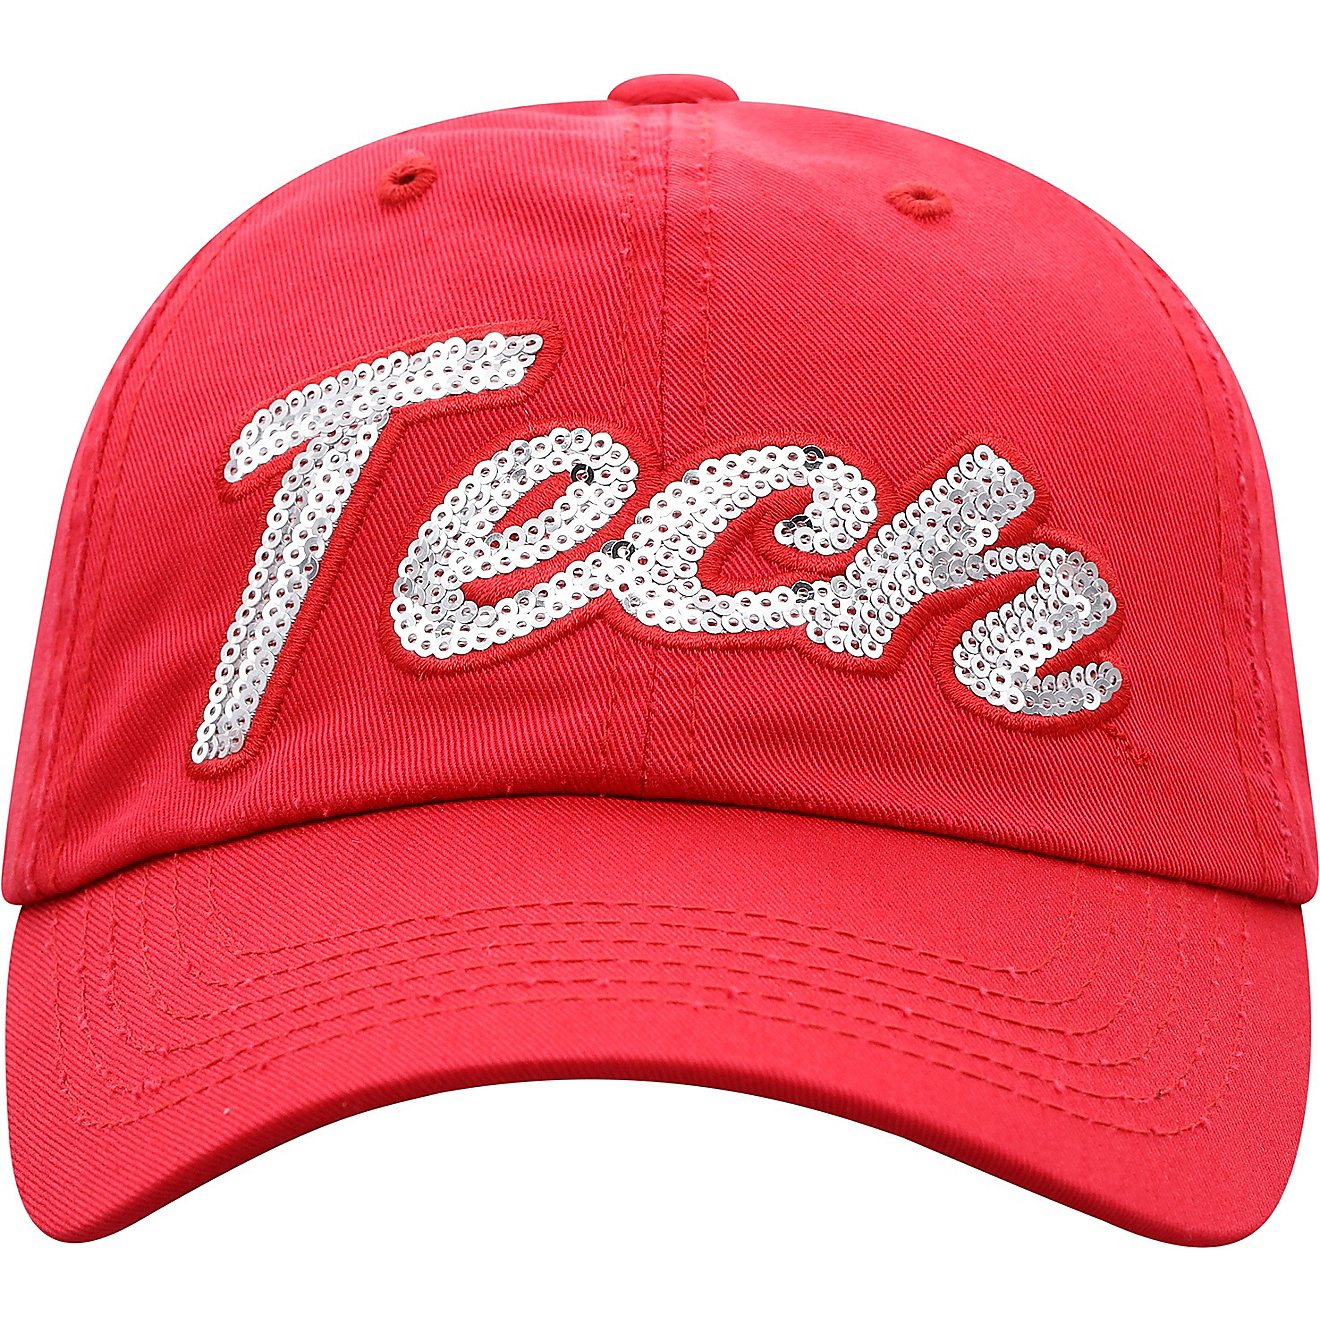 Top of the World Women's Texas Tech University Sequential Adjustable Cap                                                         - view number 3